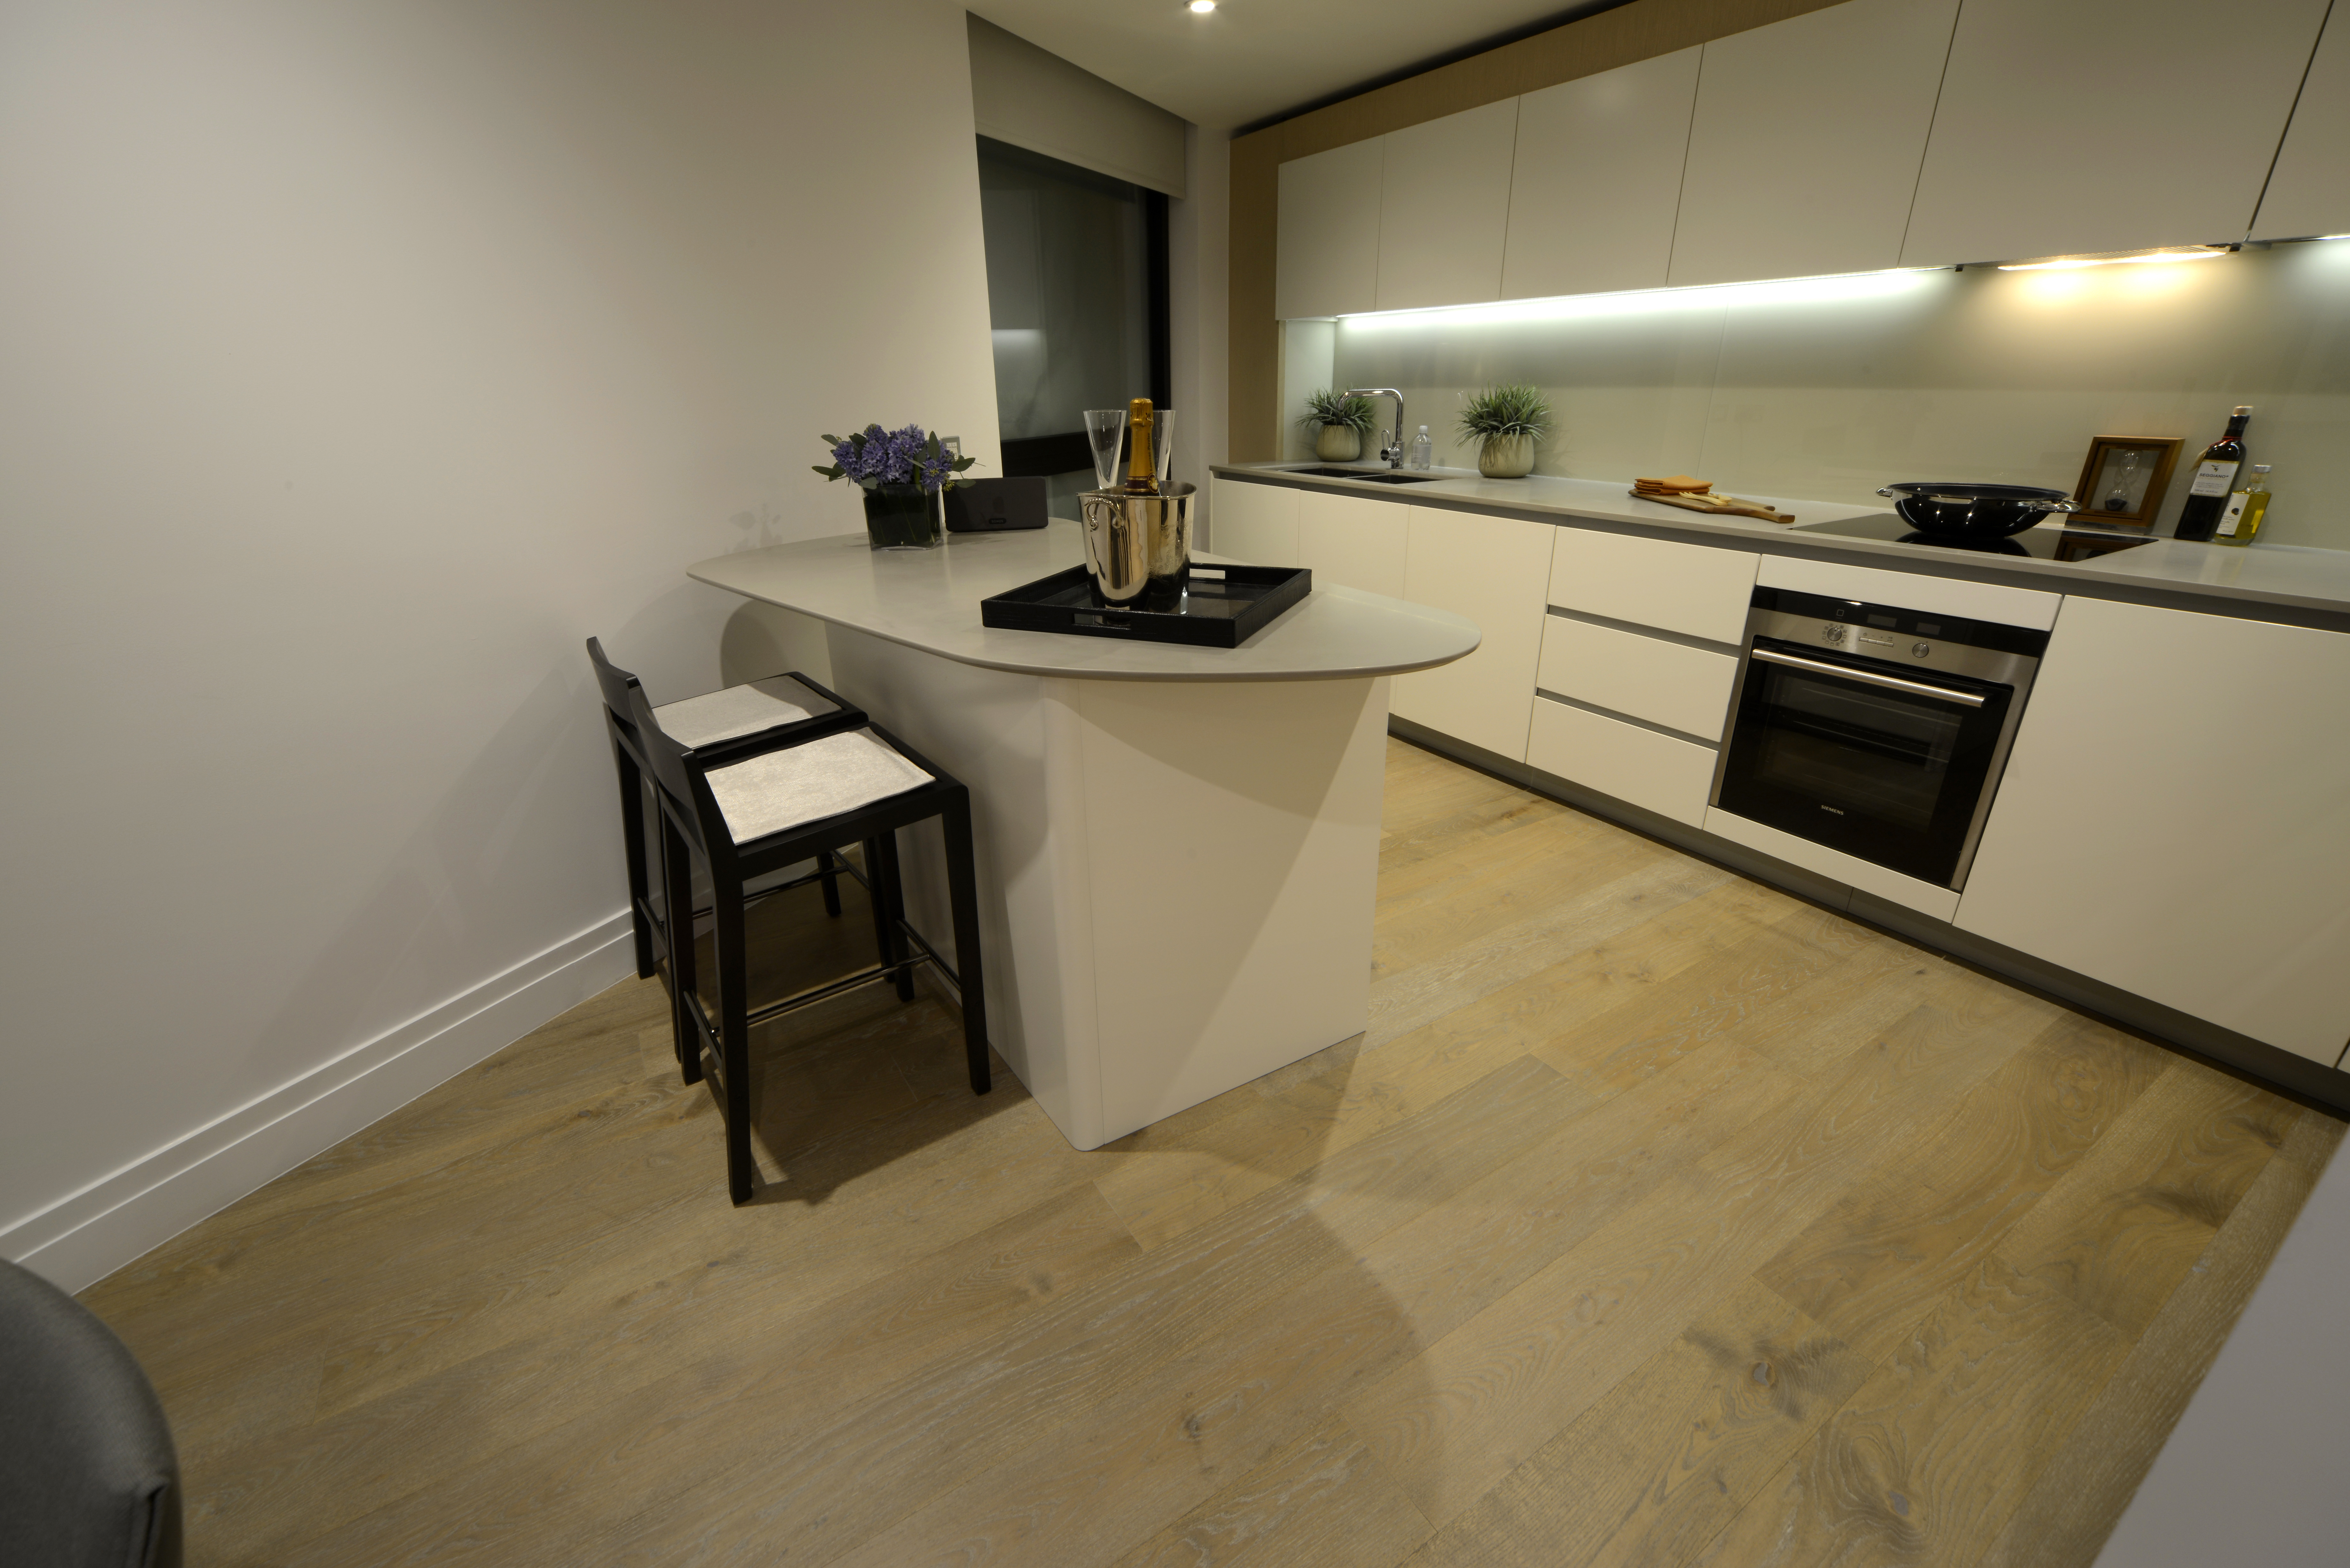 Fumed and Limed Lacquered Oak Floor fitted in kitchens throughout high rise development in London